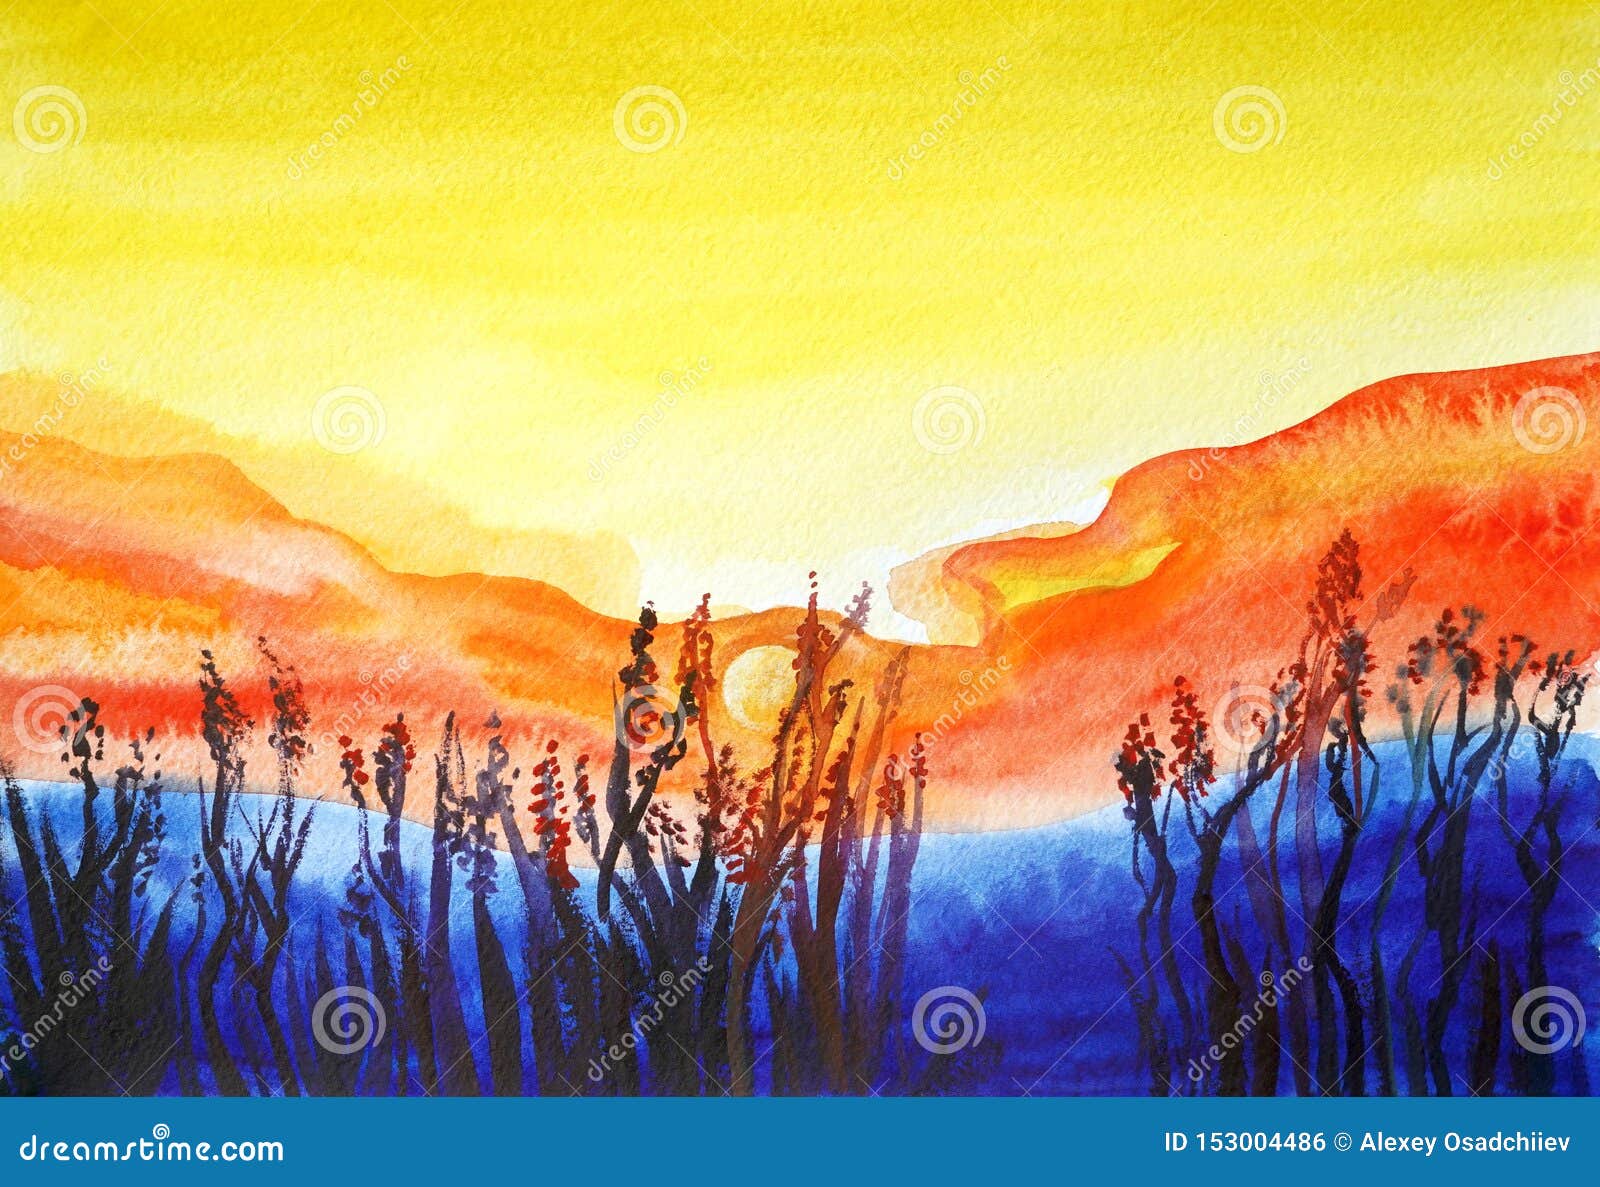 Drawing Of Bright Sunset Sunrise Over The Sea Or Blue Mountains Stock Illustration Illustration Of Material Nature 153004486